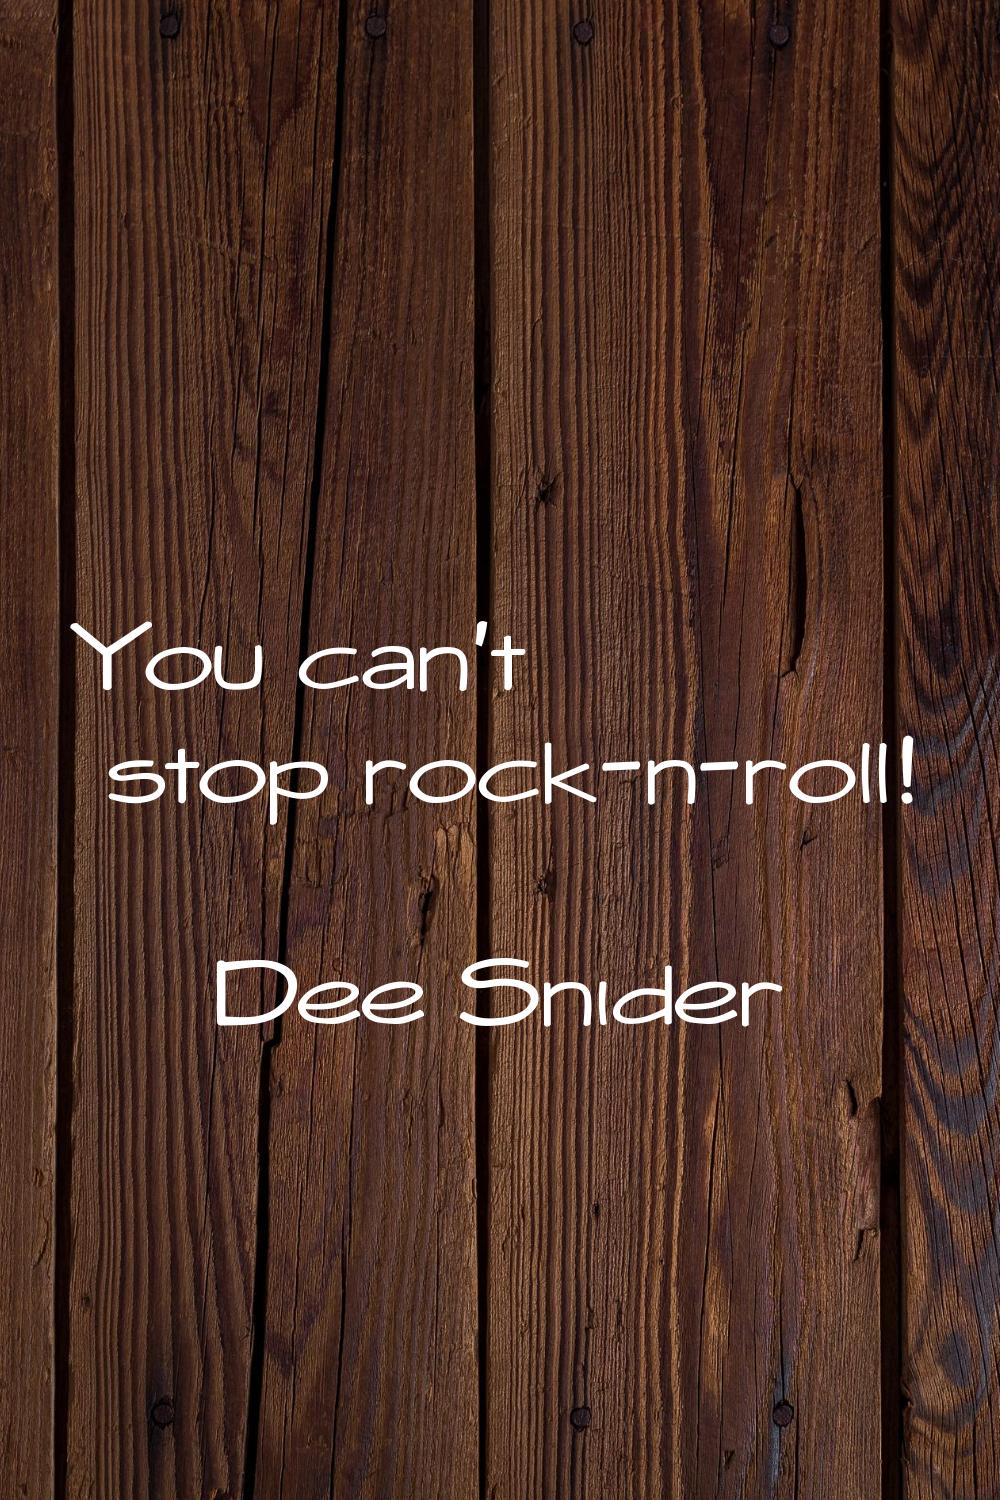 You can't stop rock-n-roll!